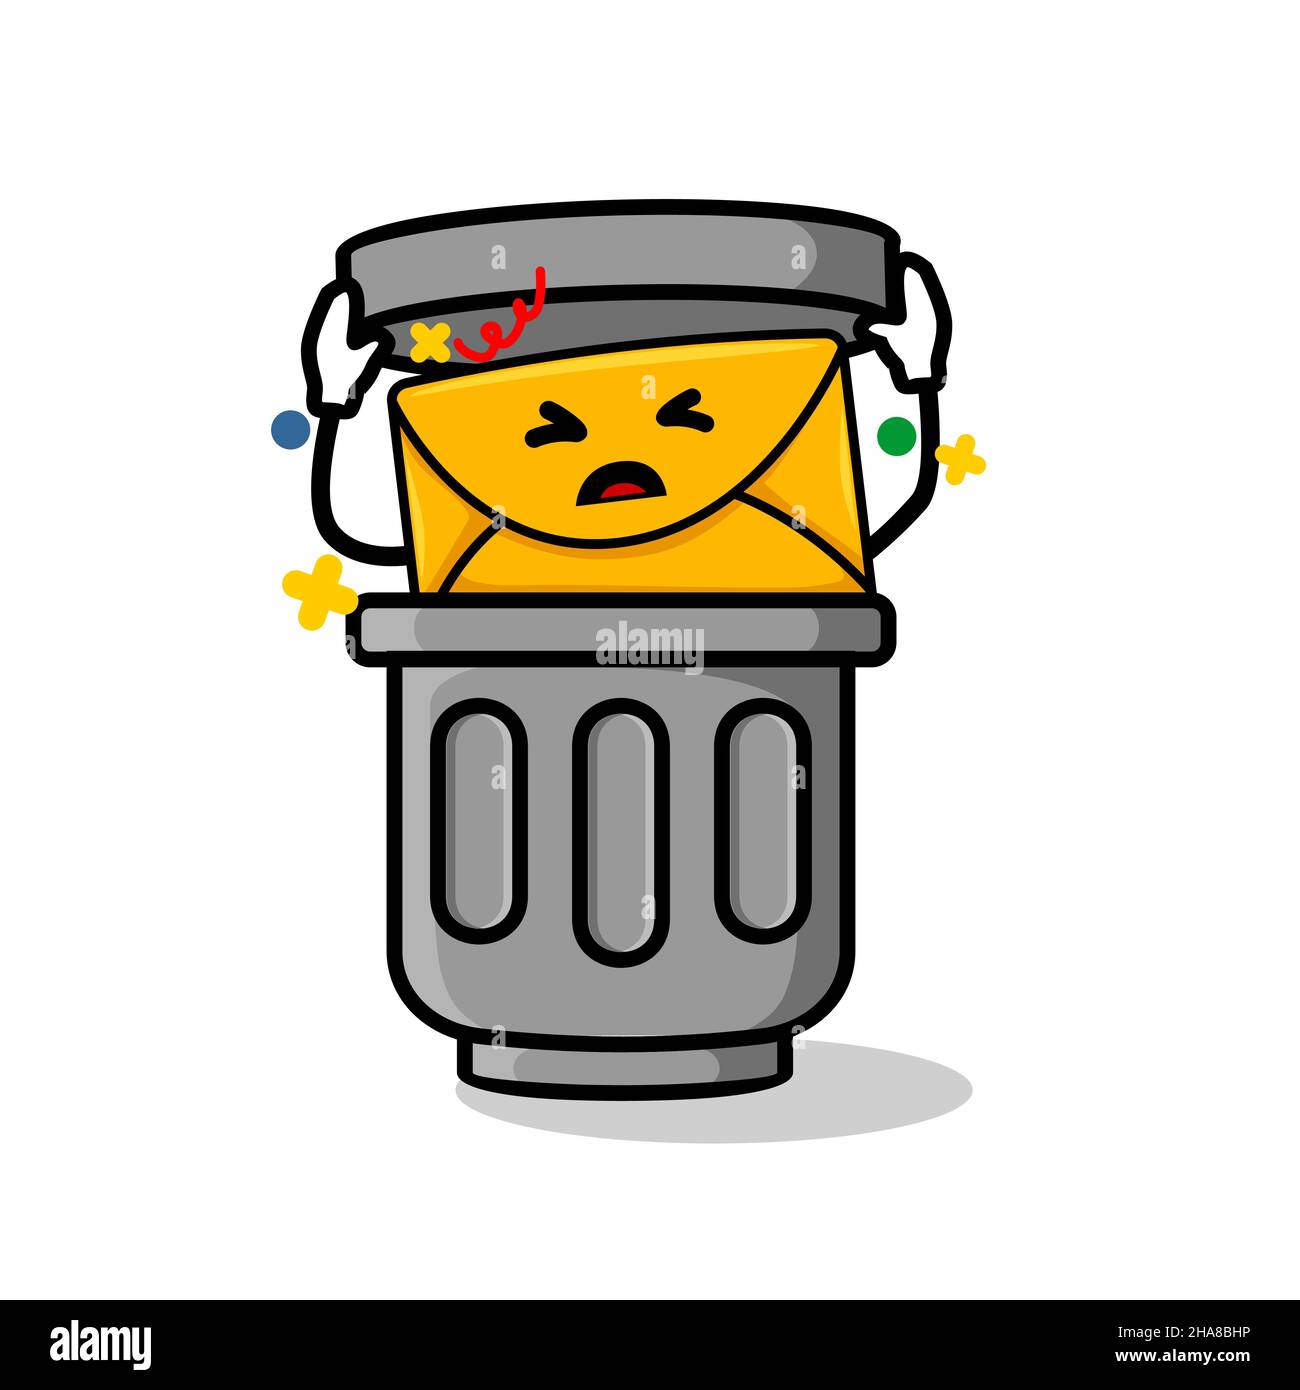 spam or junk email concept. isolated cute mail cartoon face iside rubbish bin vector illustration Stock Vector